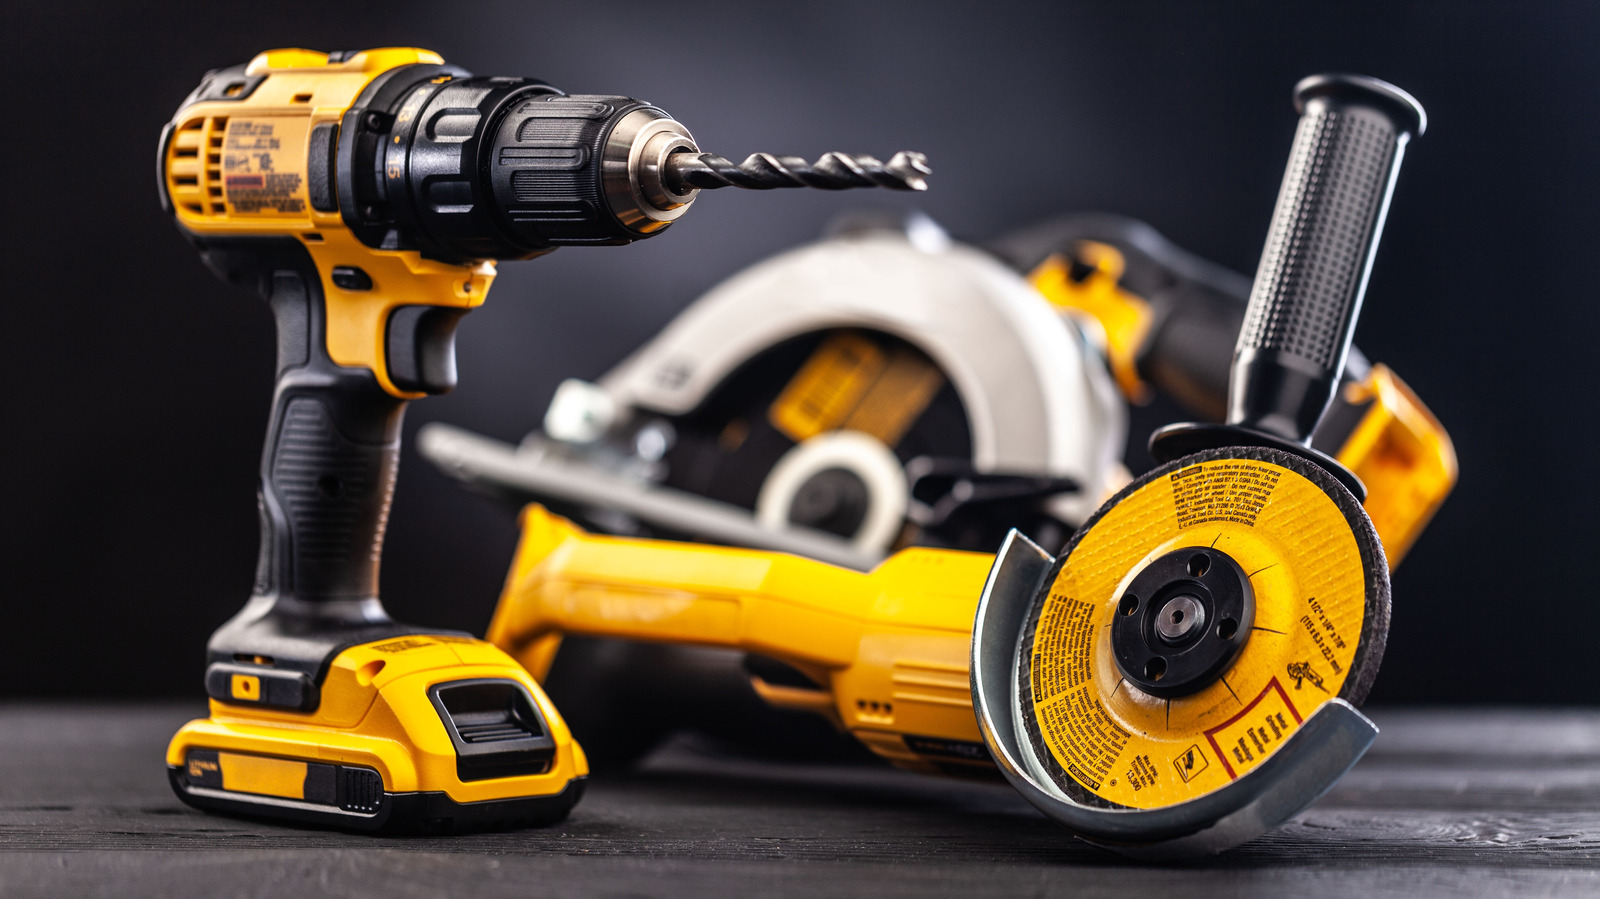 Corded Vs Cordless Power Tools: Which Are Better?